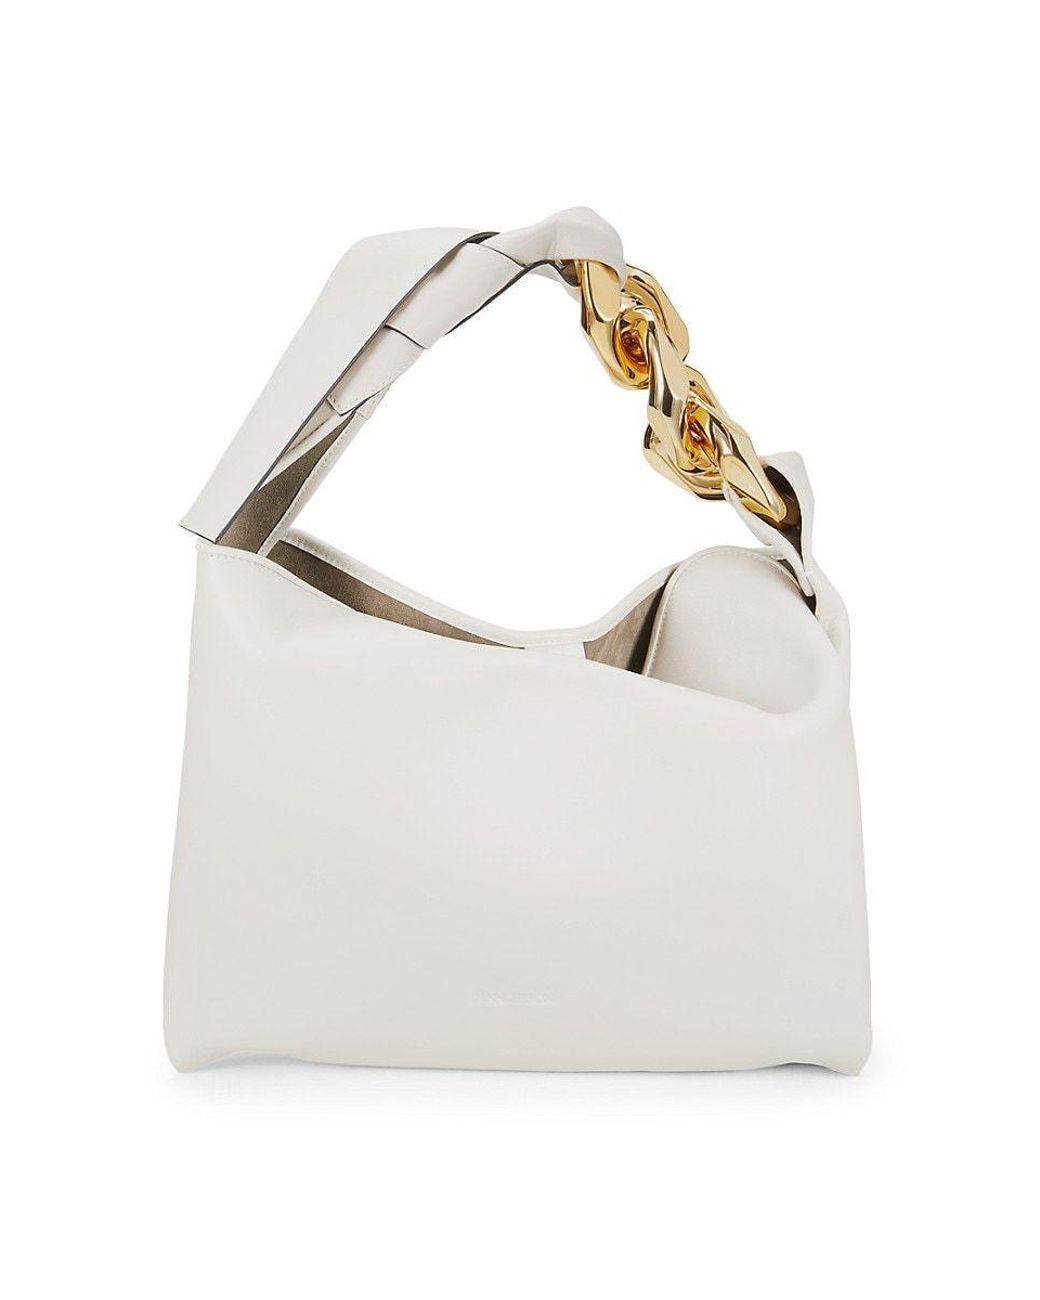 JW Anderson Leather Hobo Bag in White | Lyst